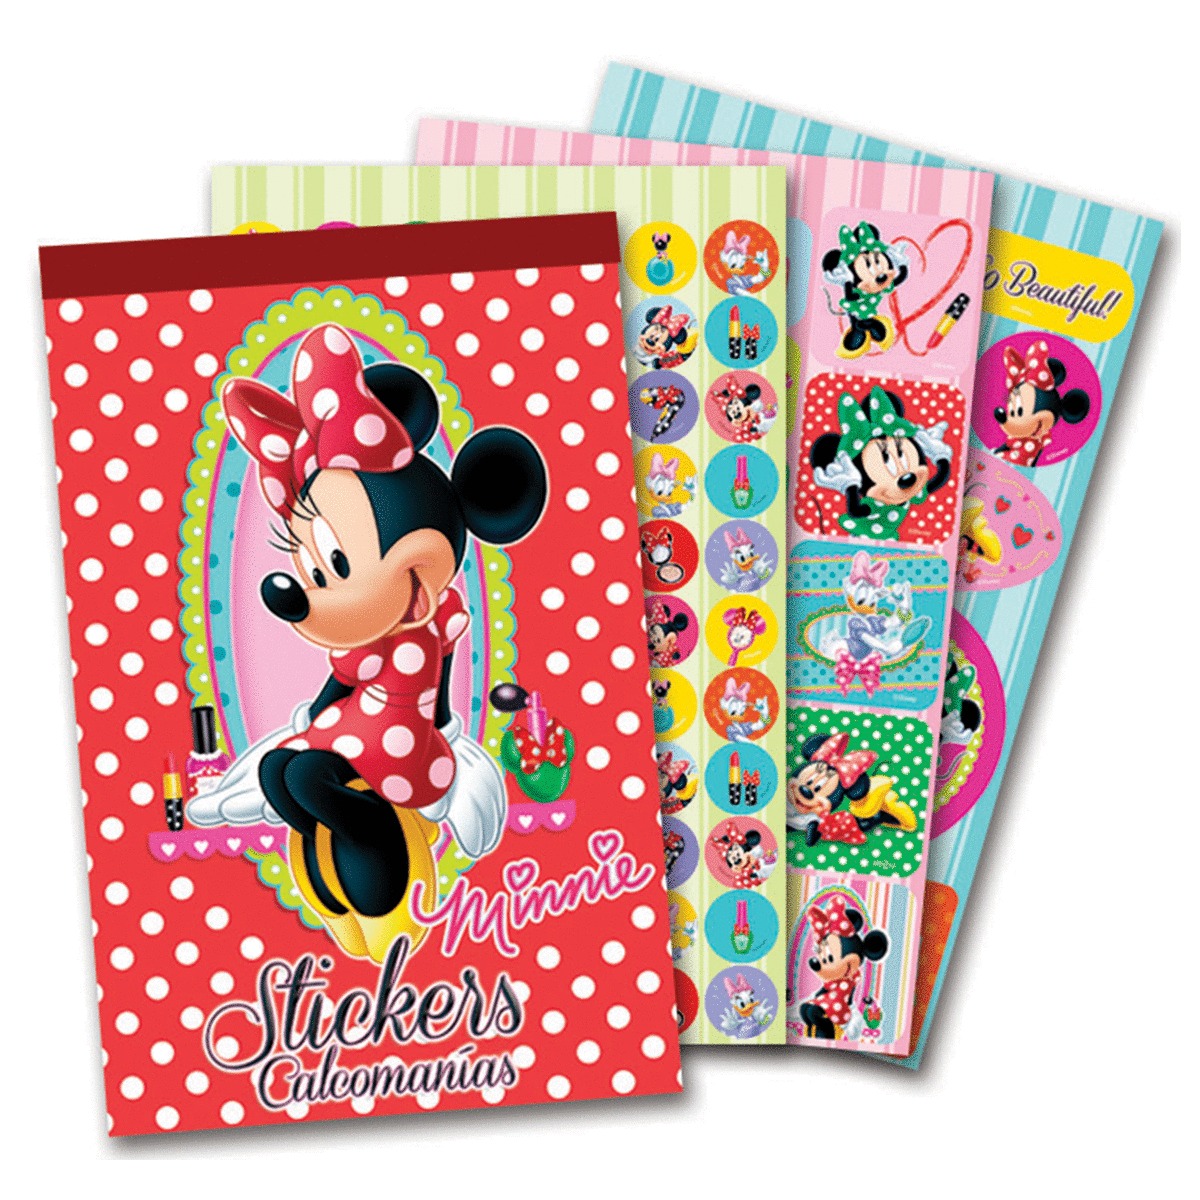 STICKERS GRANMARK MINNIE MOUSE (BLOCK) | Office Depot Mexico